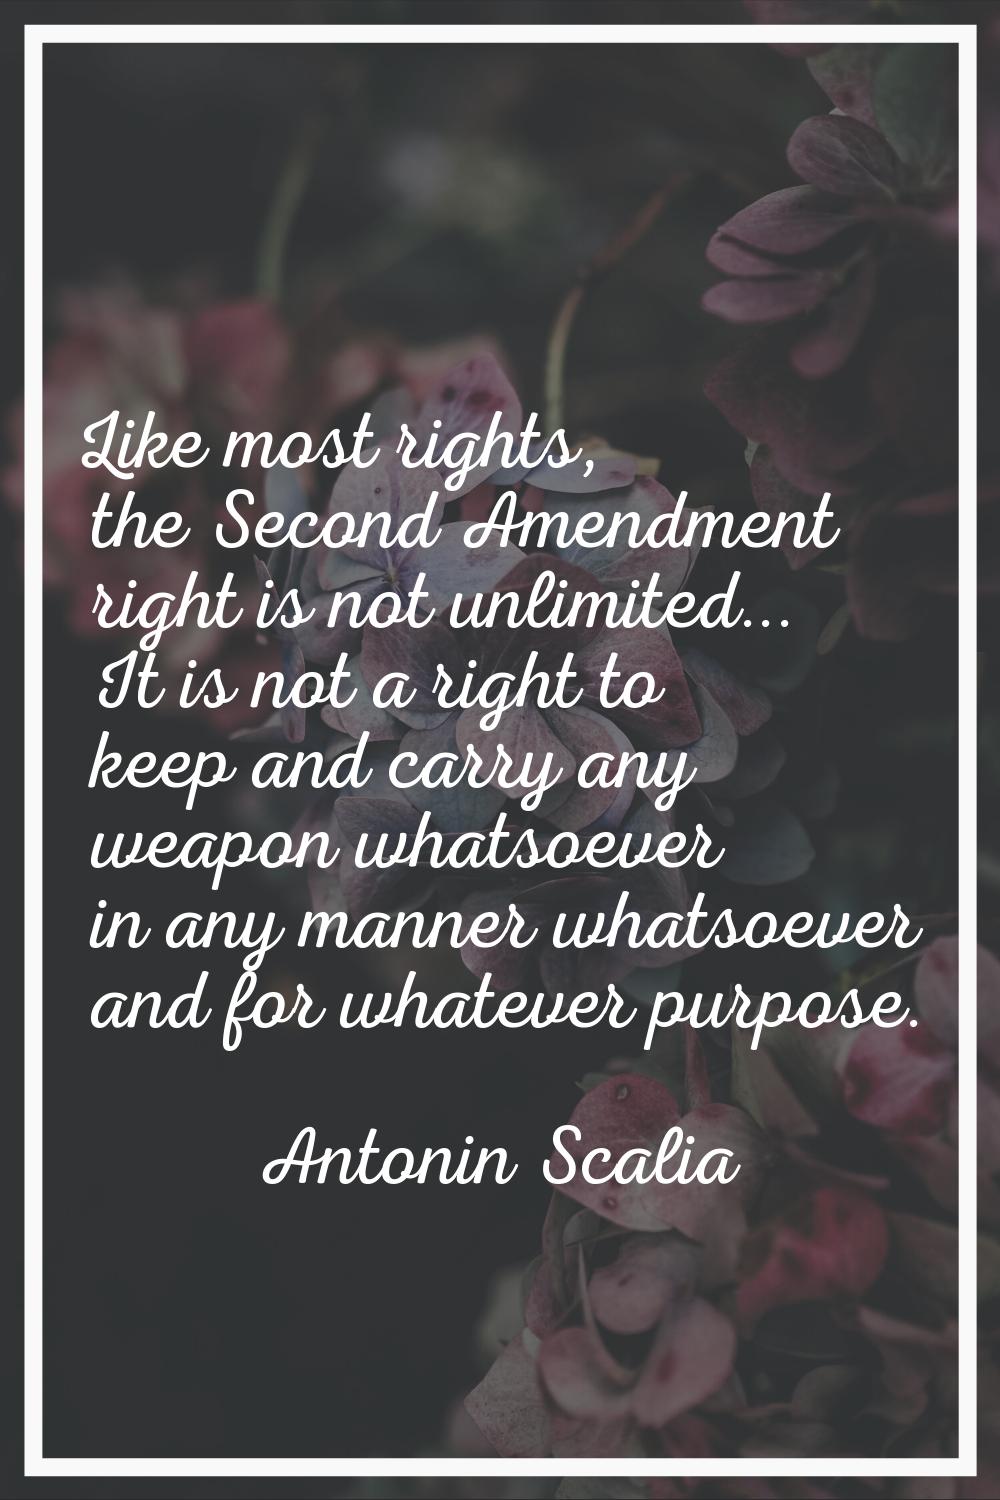 Like most rights, the Second Amendment right is not unlimited... It is not a right to keep and carr